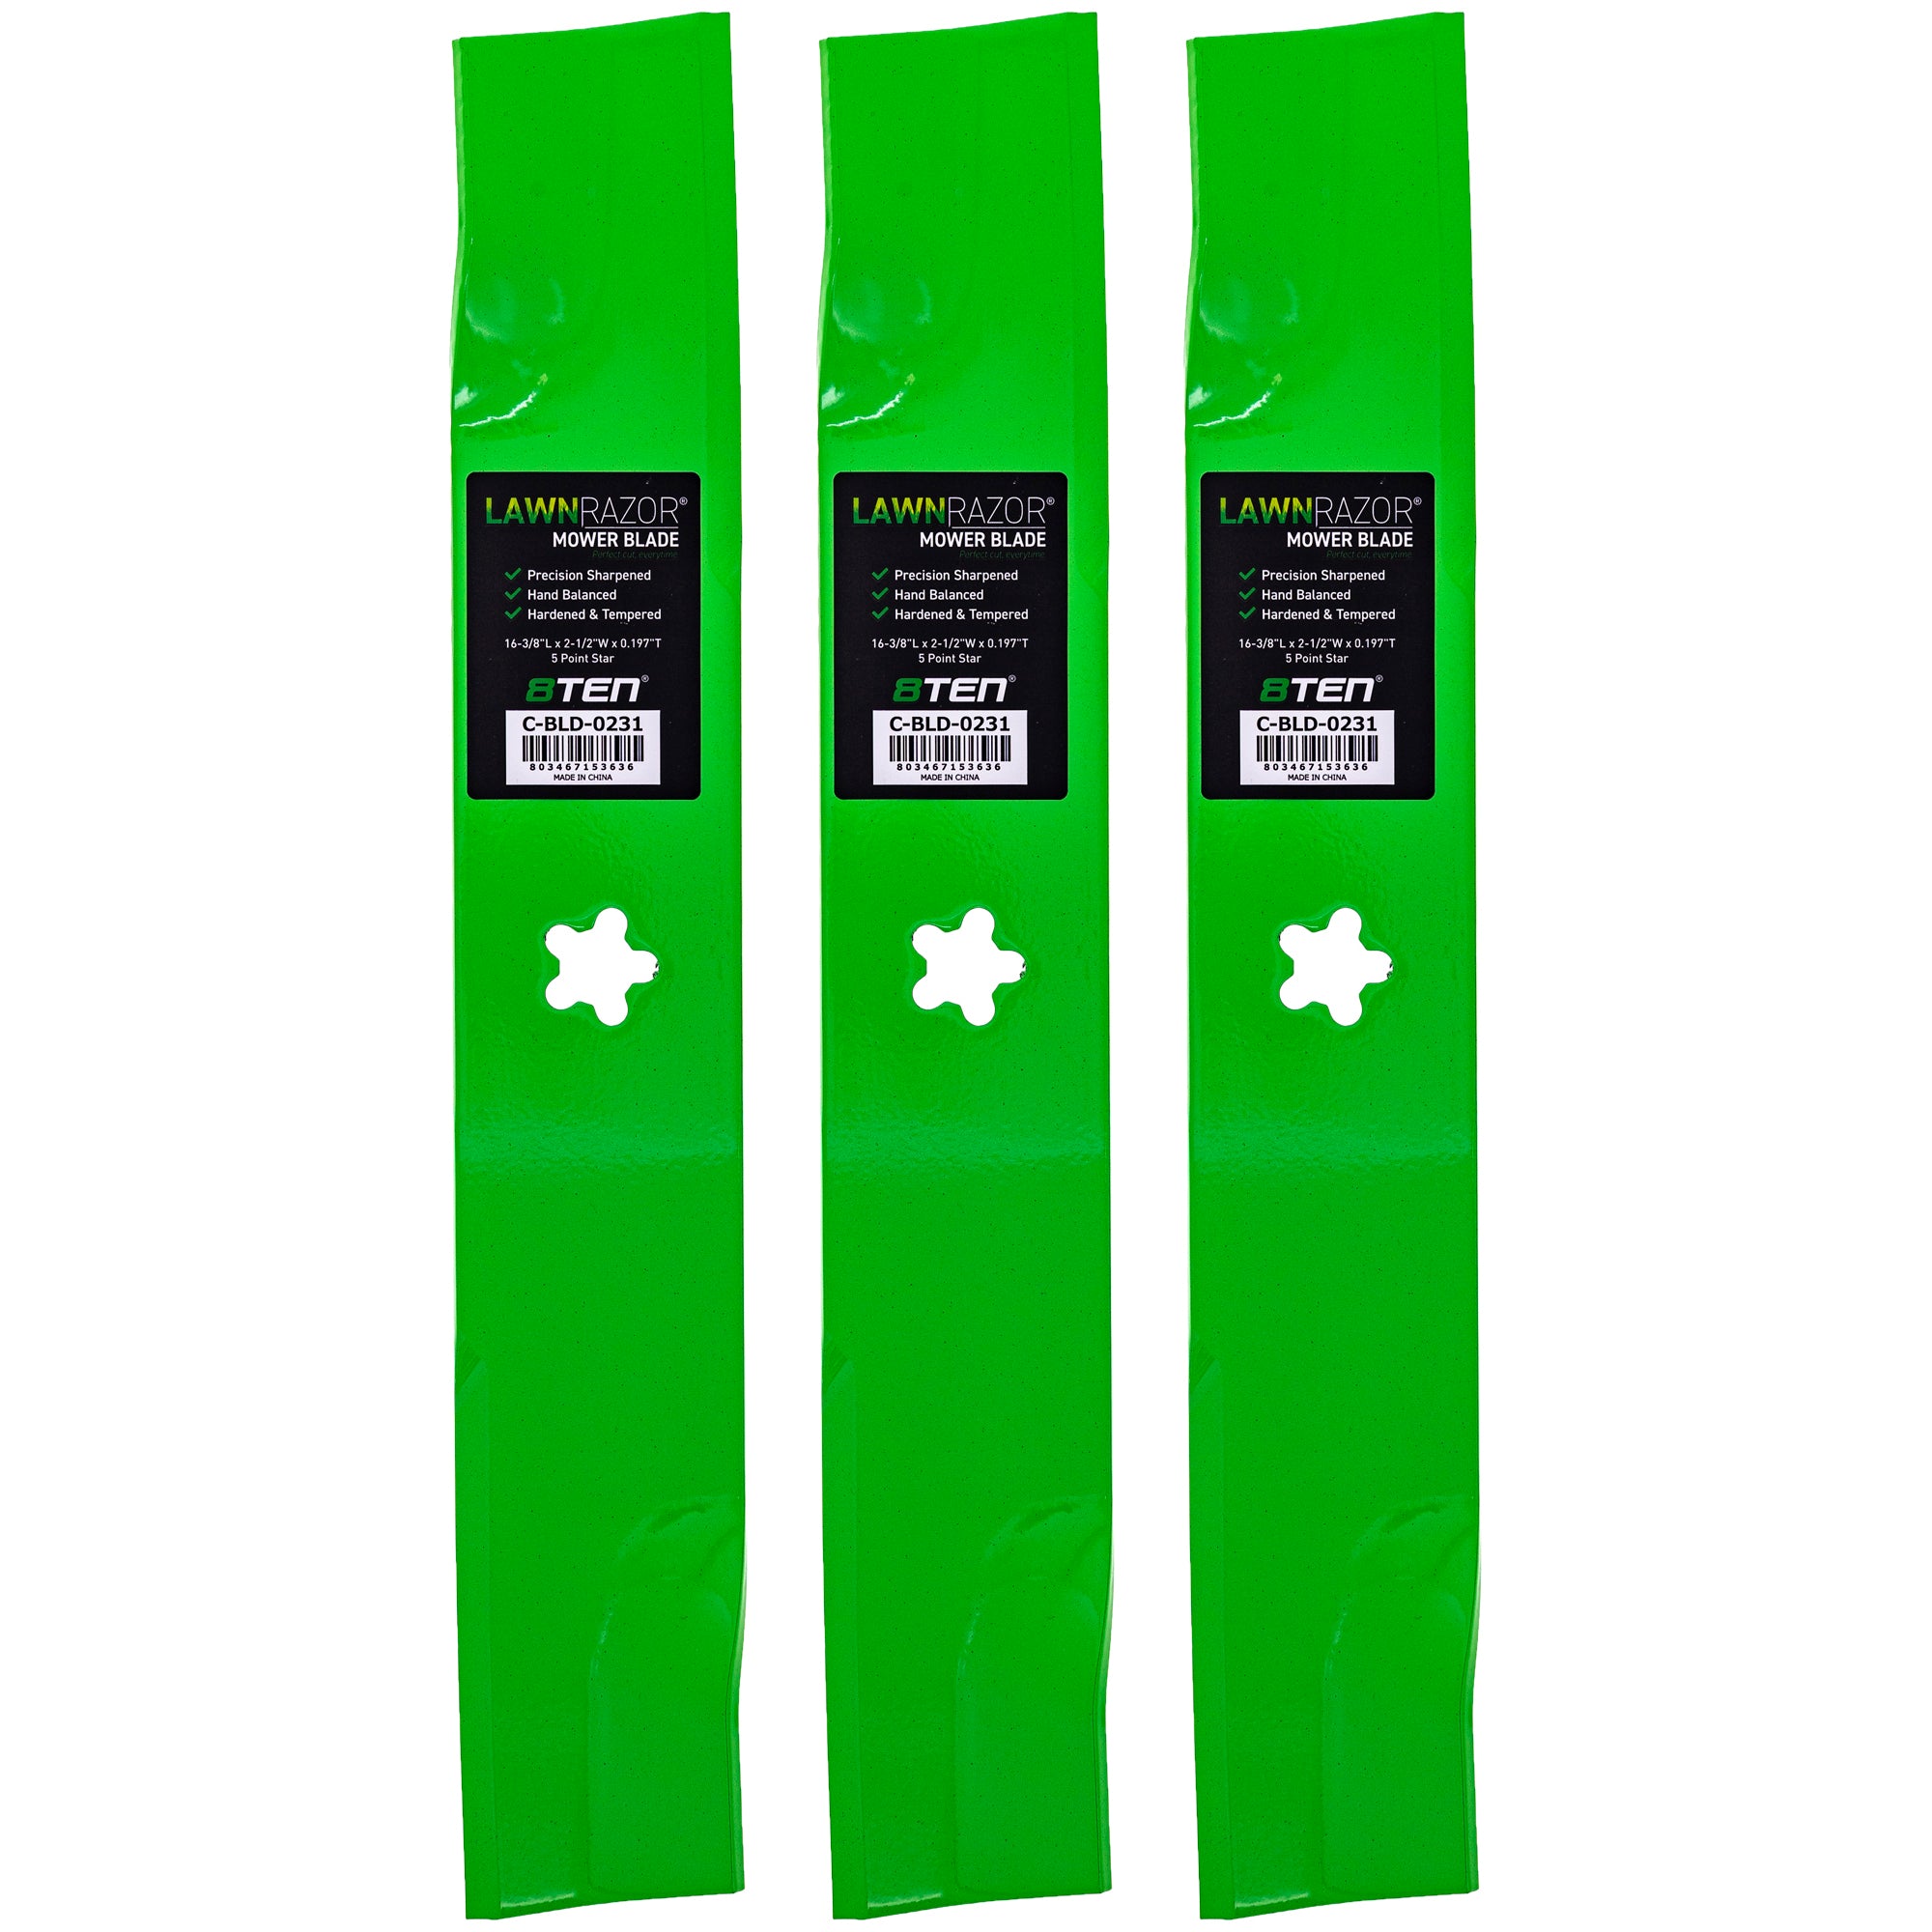 LawnRAZOR Mower Blade 3-Pack for zOTHER Oregon KEES 8TEN 810-CBL2453D